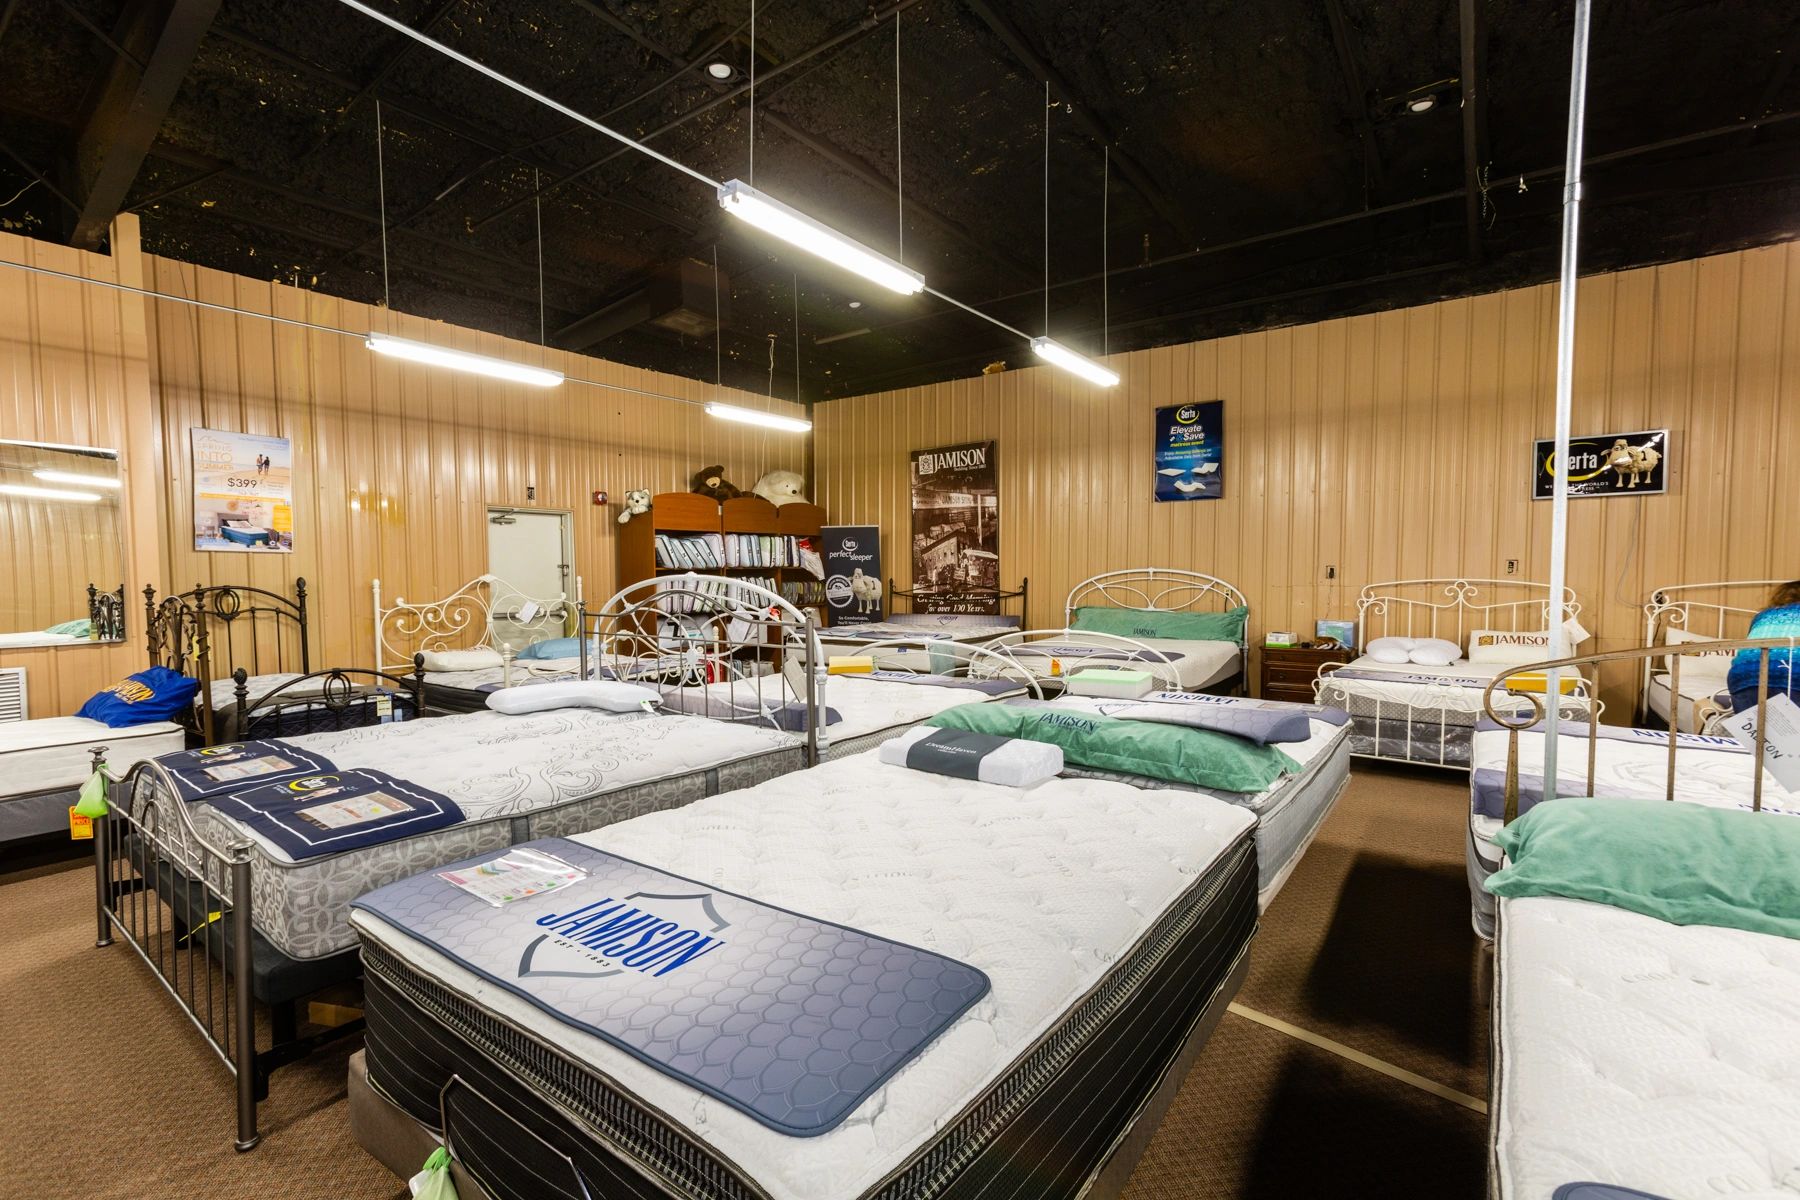 A room full of high quality mattress and beds